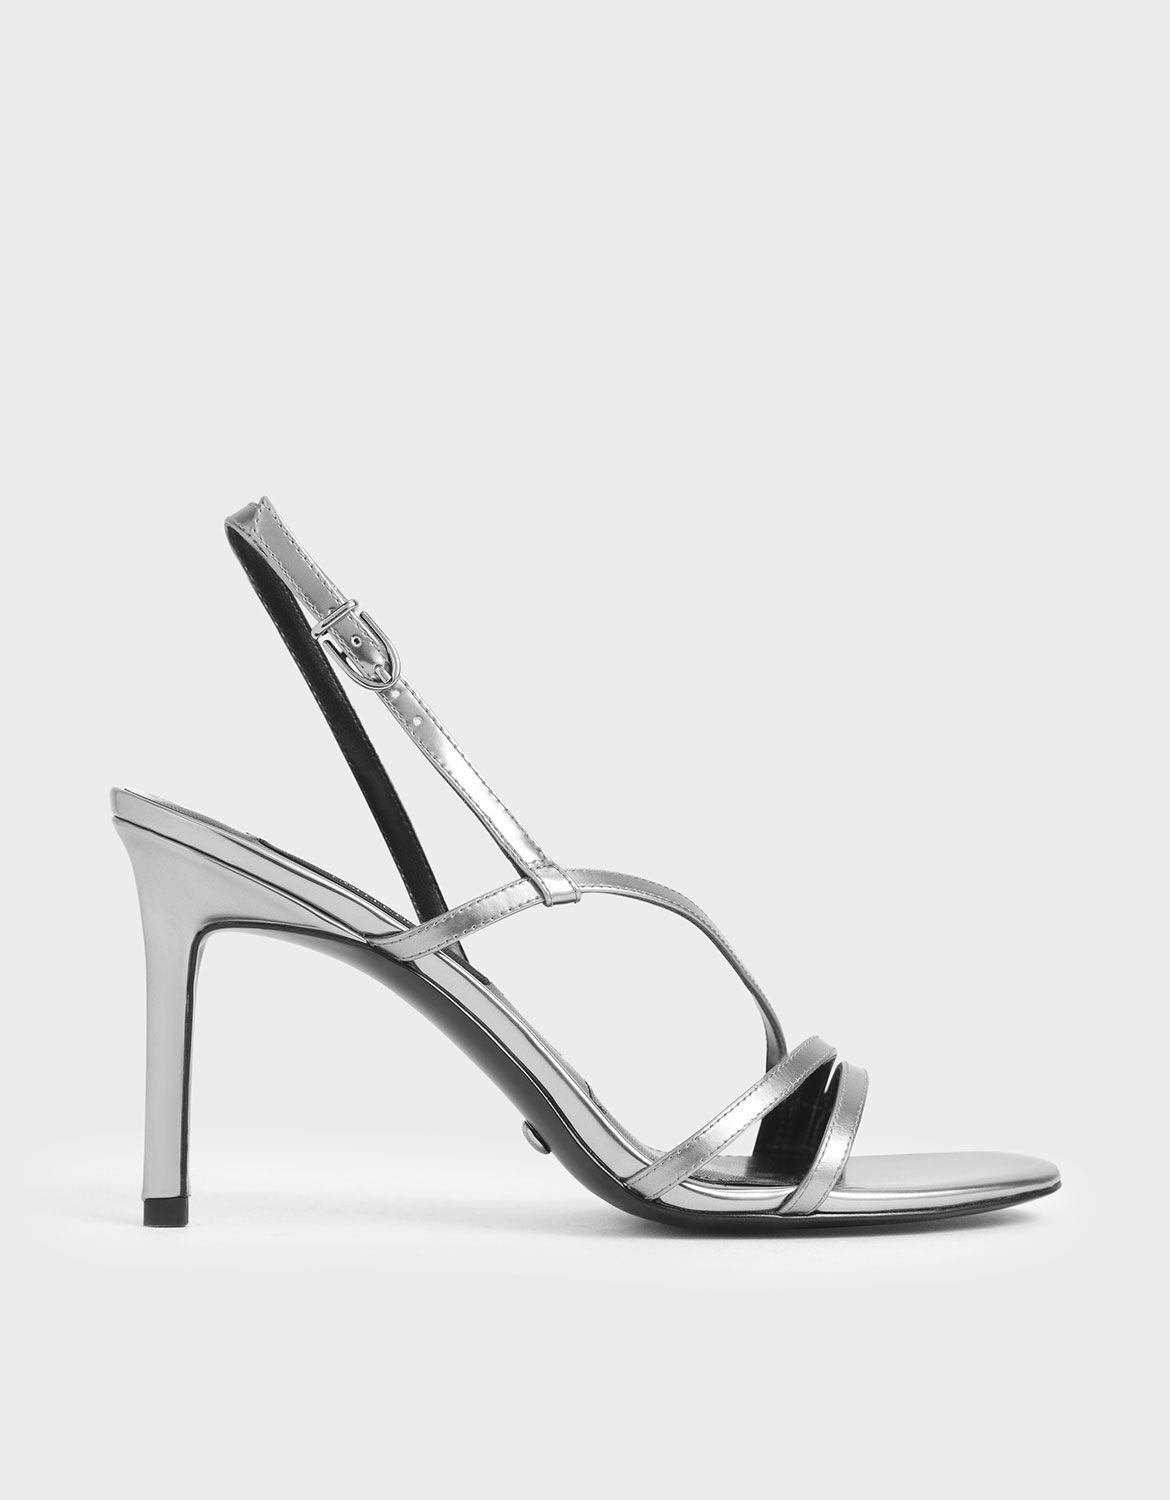 patent leather strappy heels